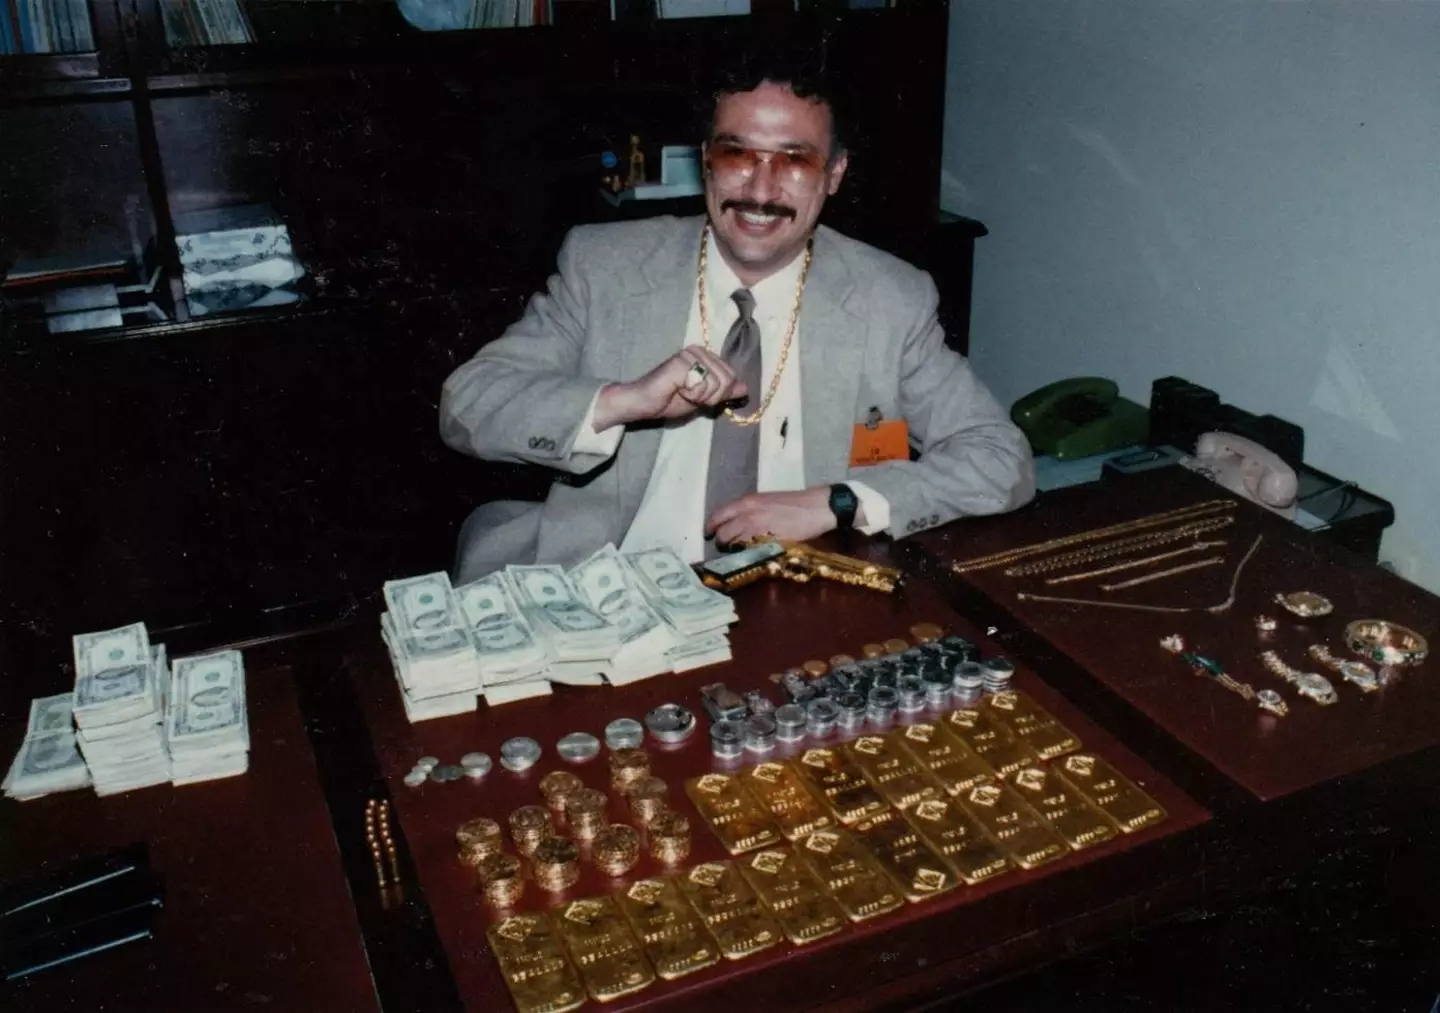 Pena, pictured next to a mountain of seized gold, was shocked by the violence he encountered.